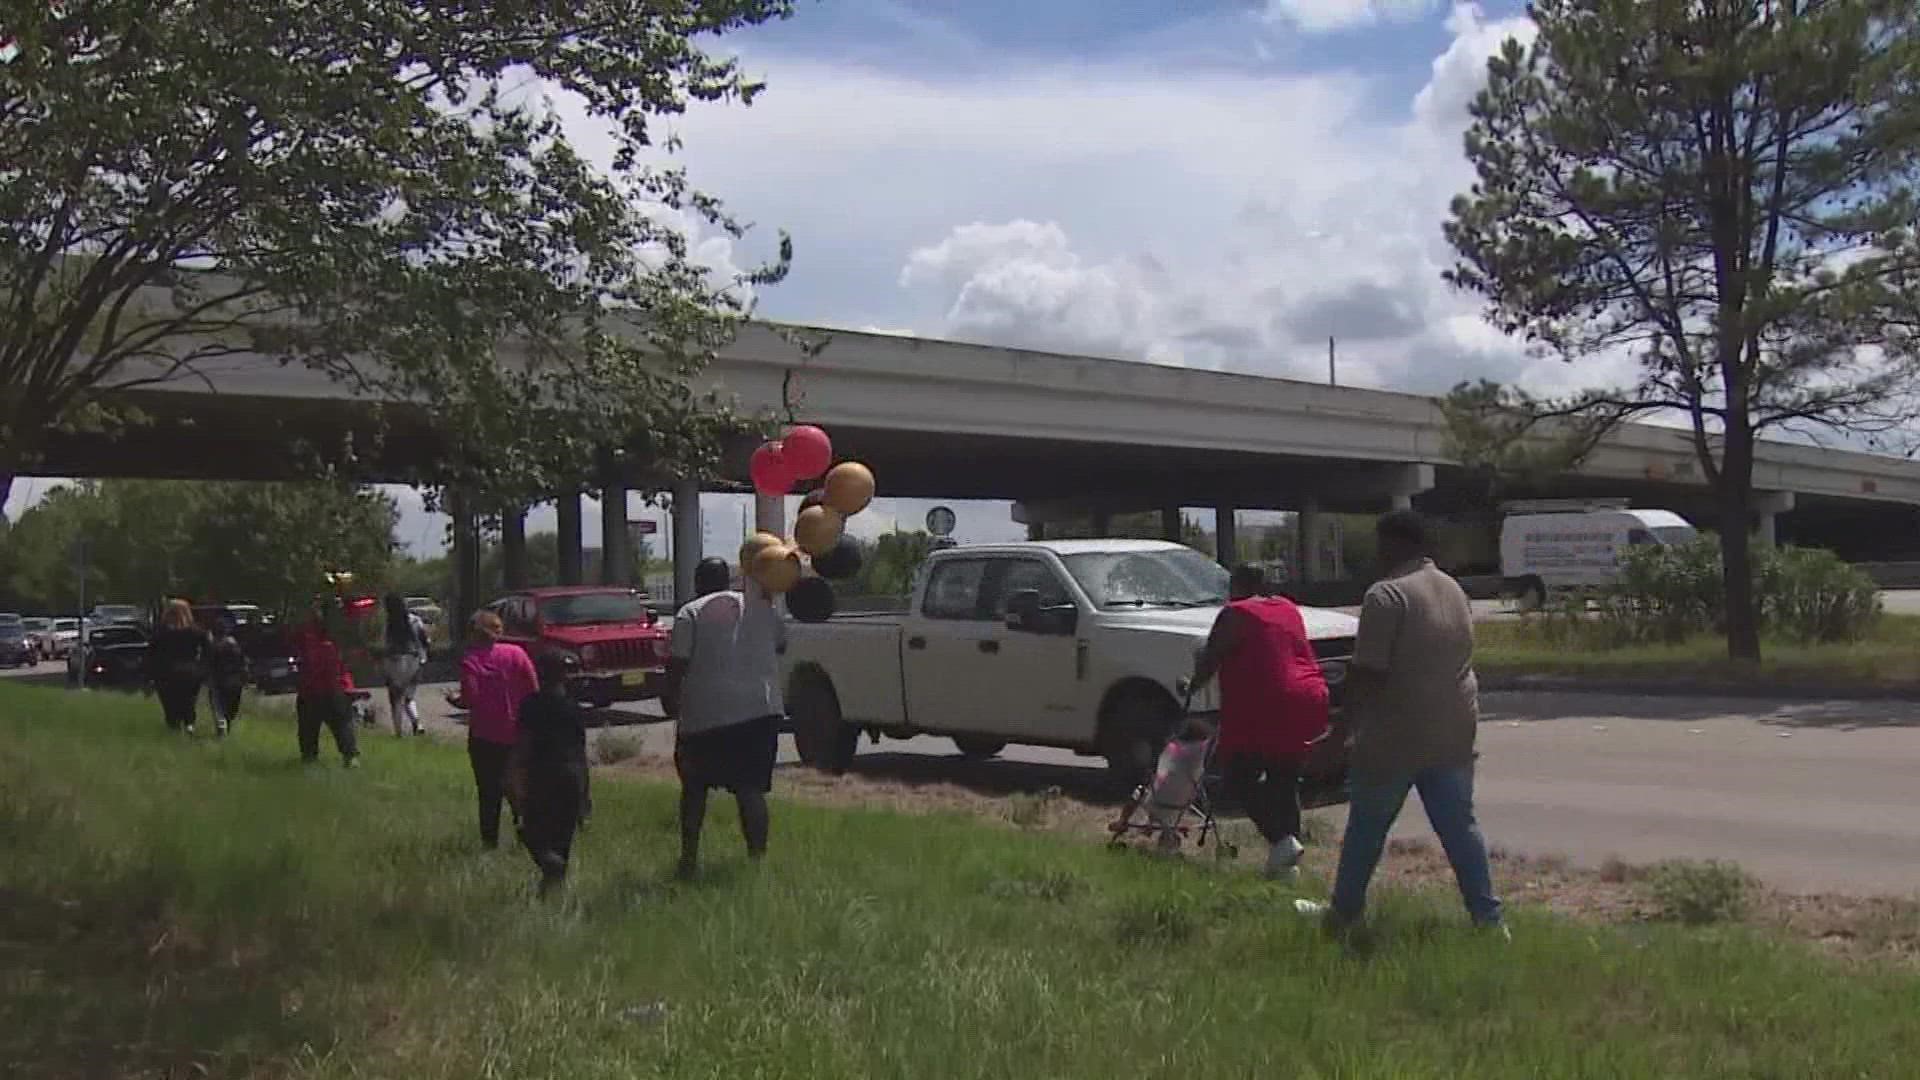 The family of the man killed in a horrific accident on the North Freeway this week held a vigil Saturday at the location where the father of five died.